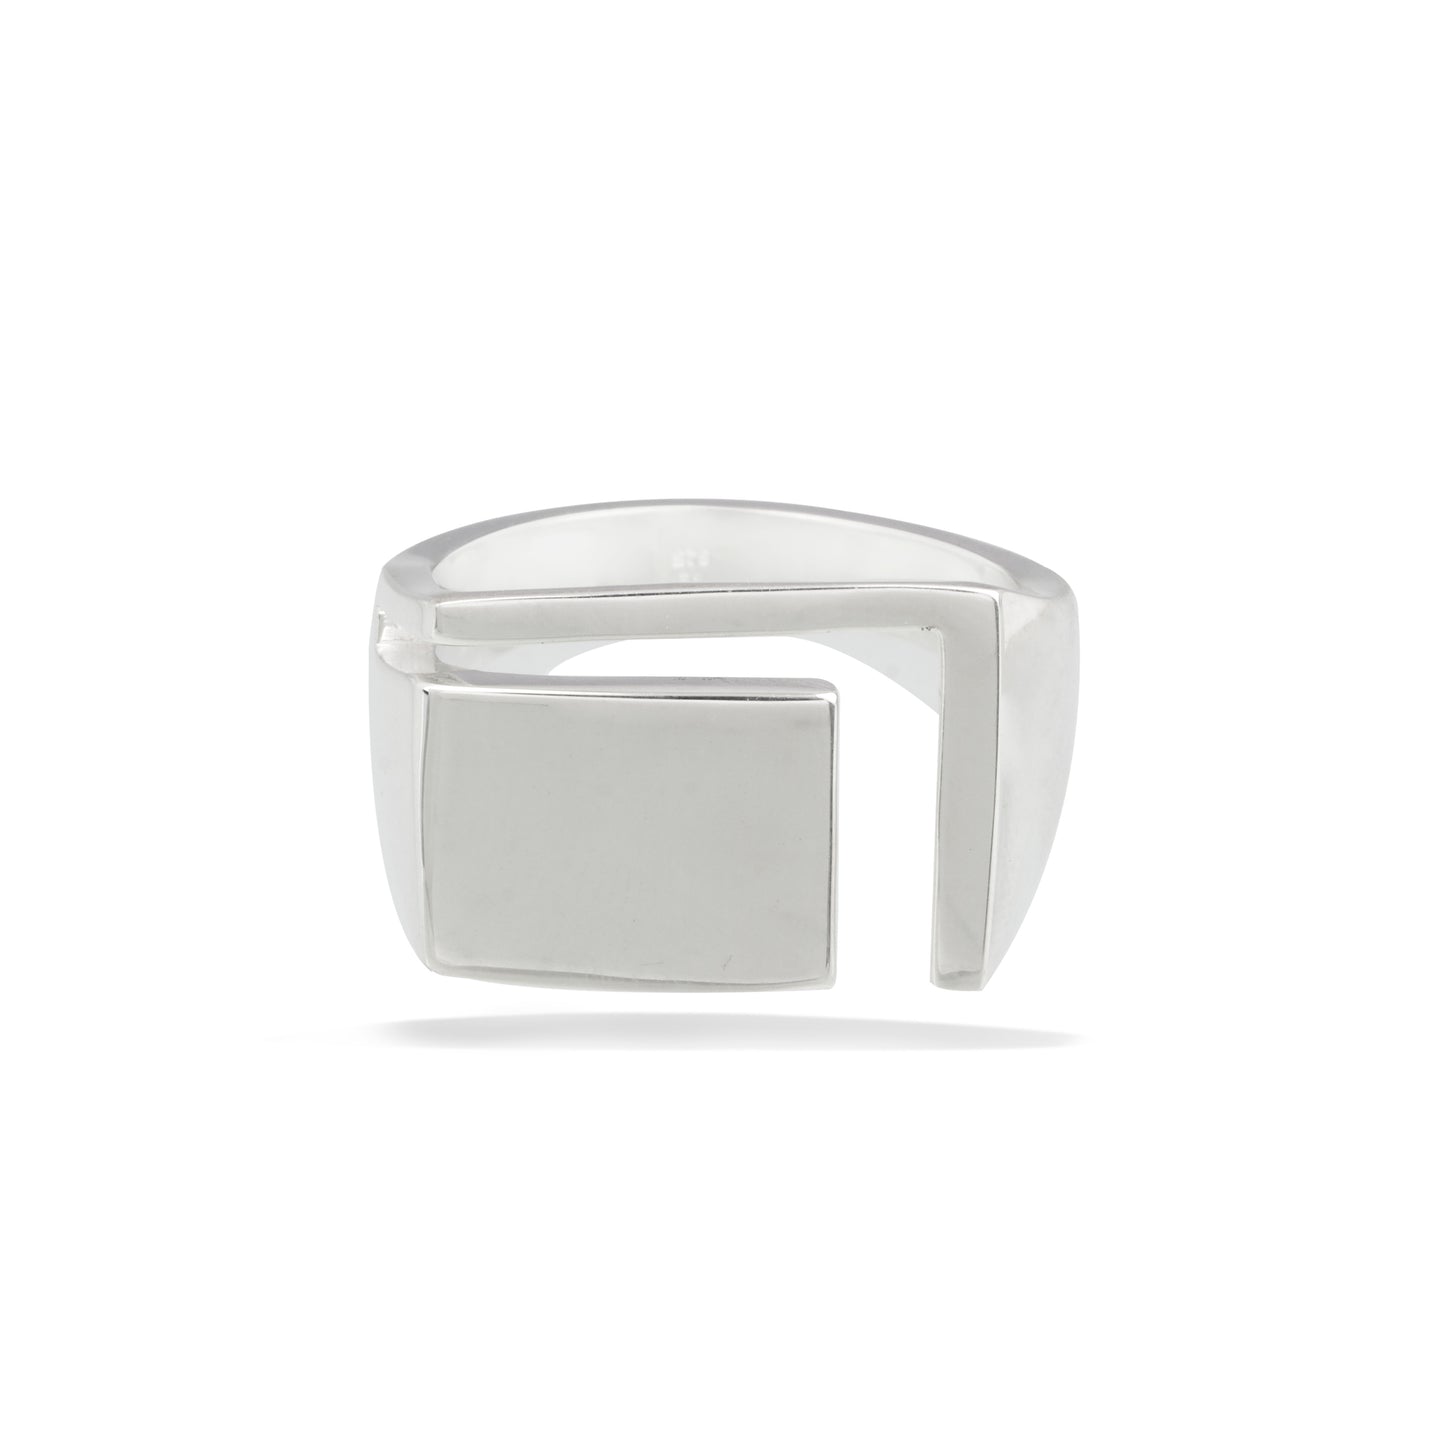 Sparkleens- Silver Rectangle Ring.